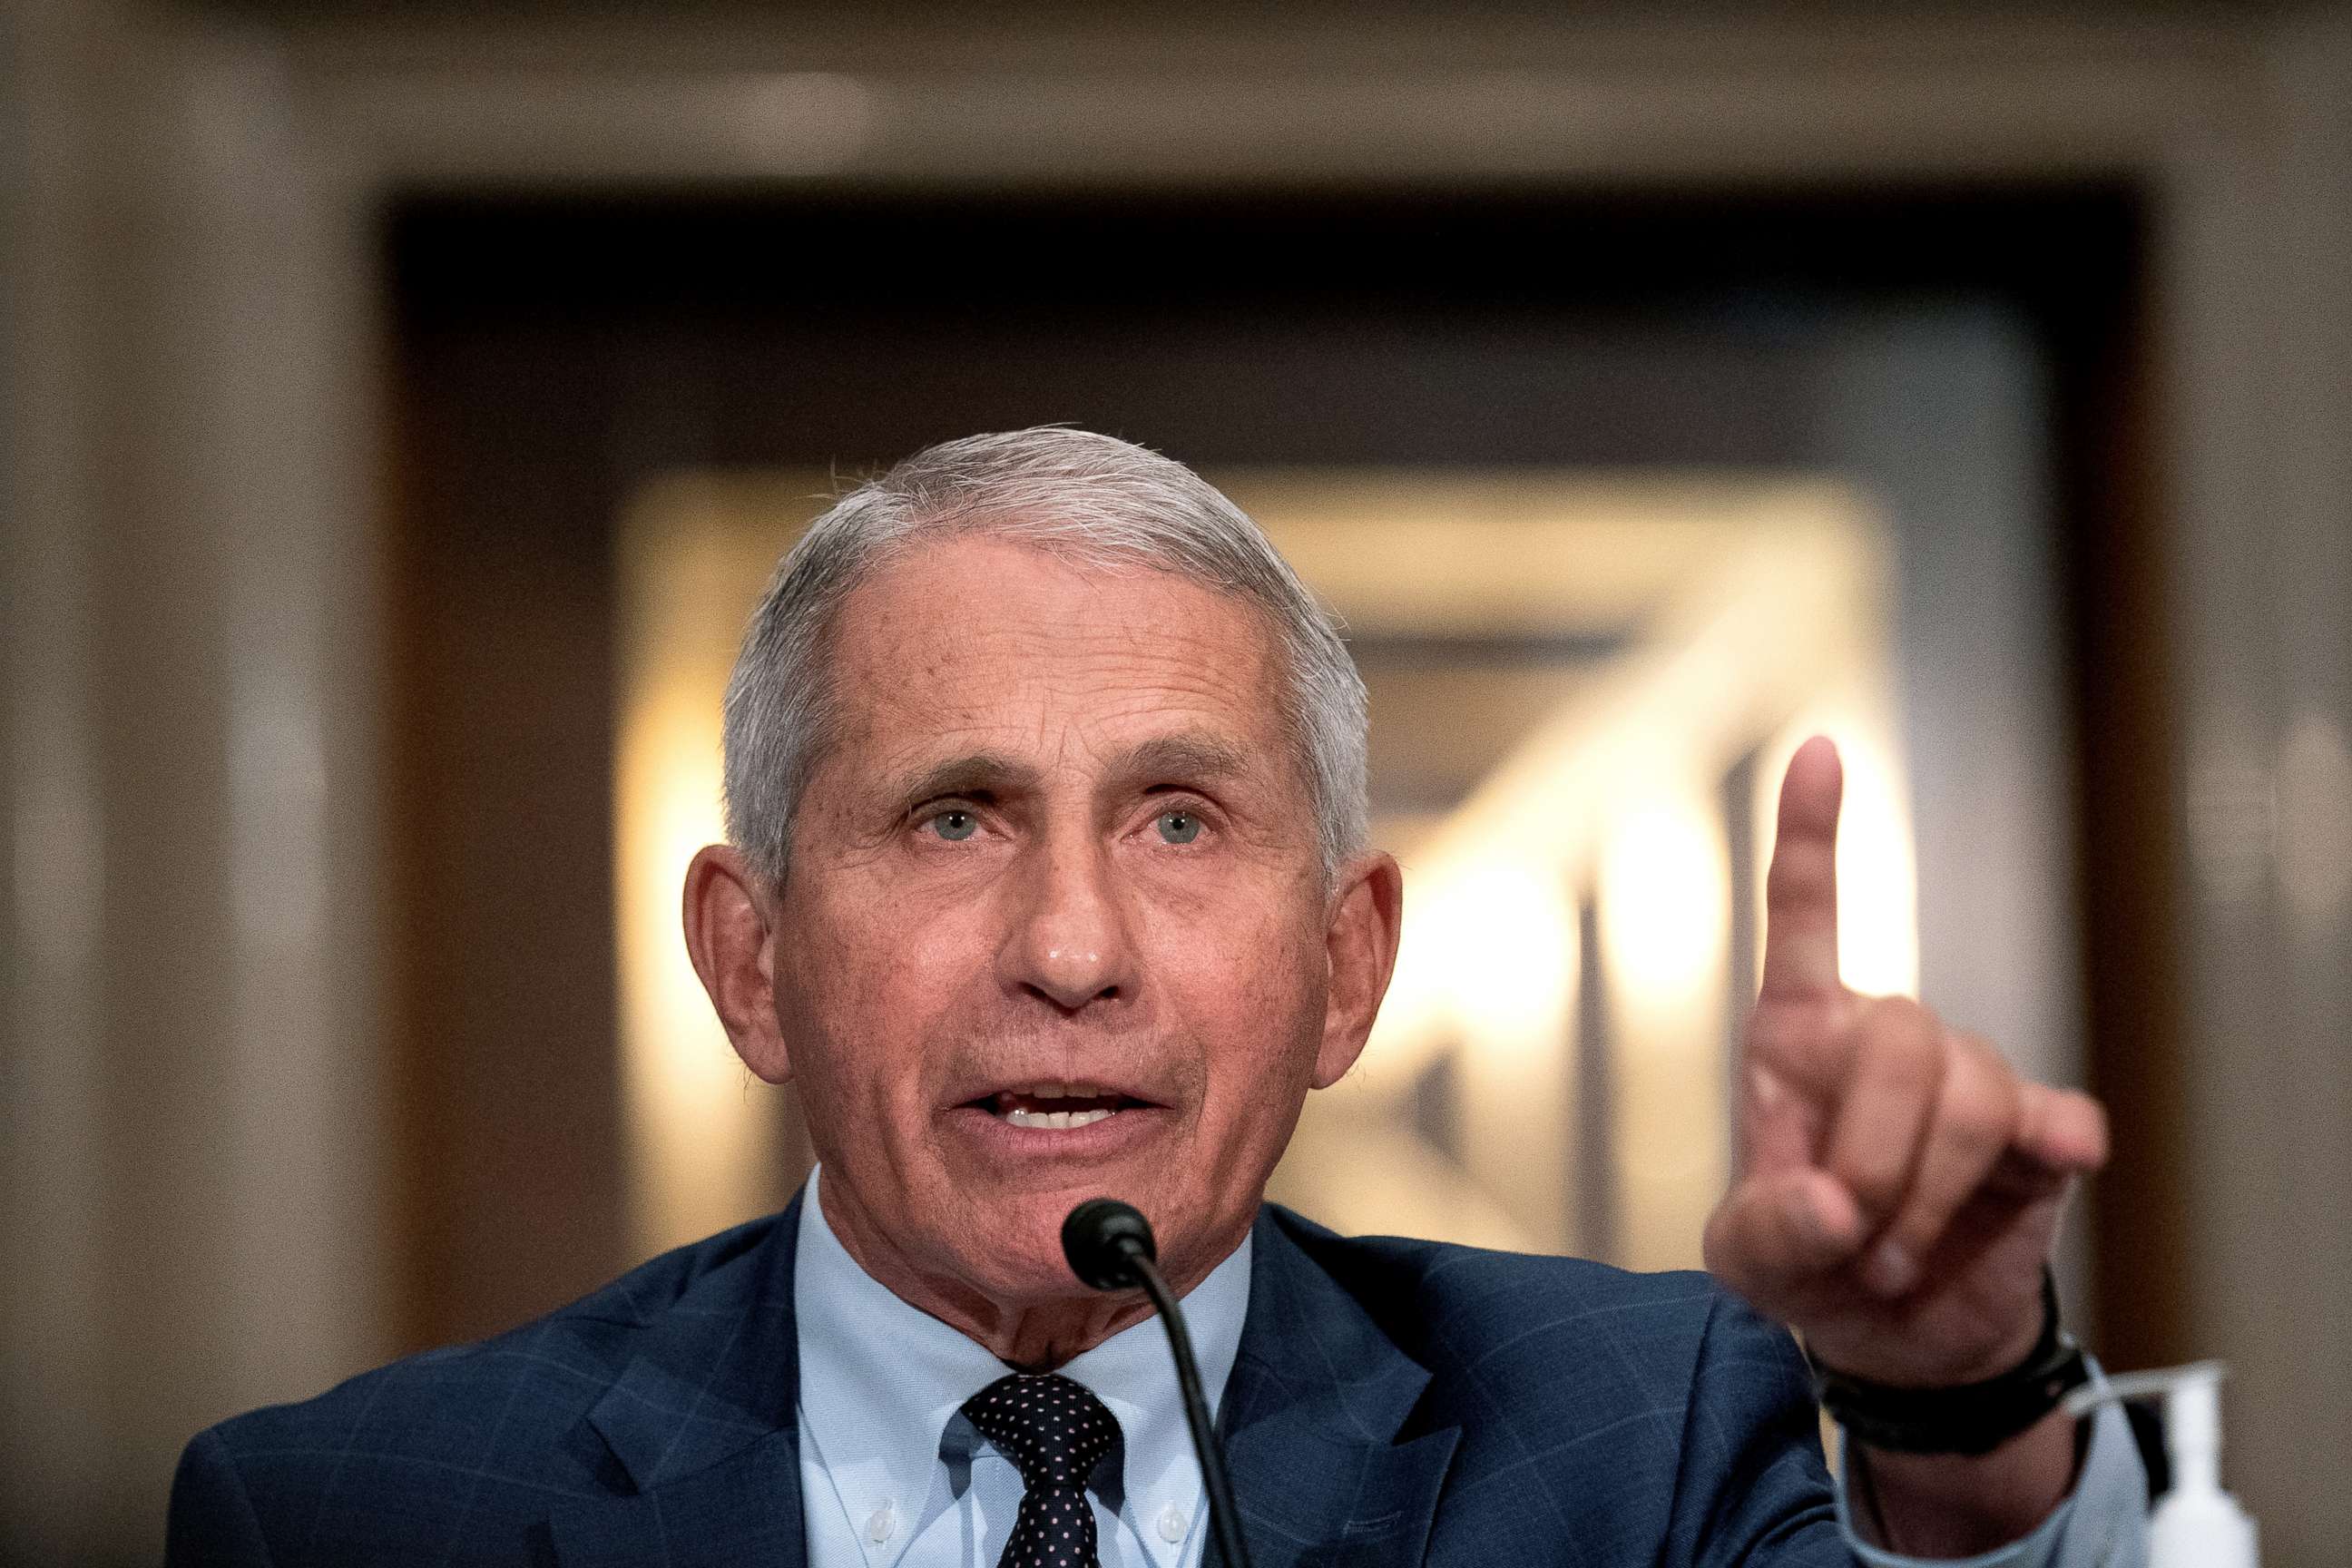 PHOTO: Dr. Anthony Fauci, director of the National Institute of Allergy and Infectious Diseases, speaks during a Senate Health, Education, Labor, and Pensions Committee hearing at the Dirksen Senate Office Building in Washington, D.C., July 20, 2021.